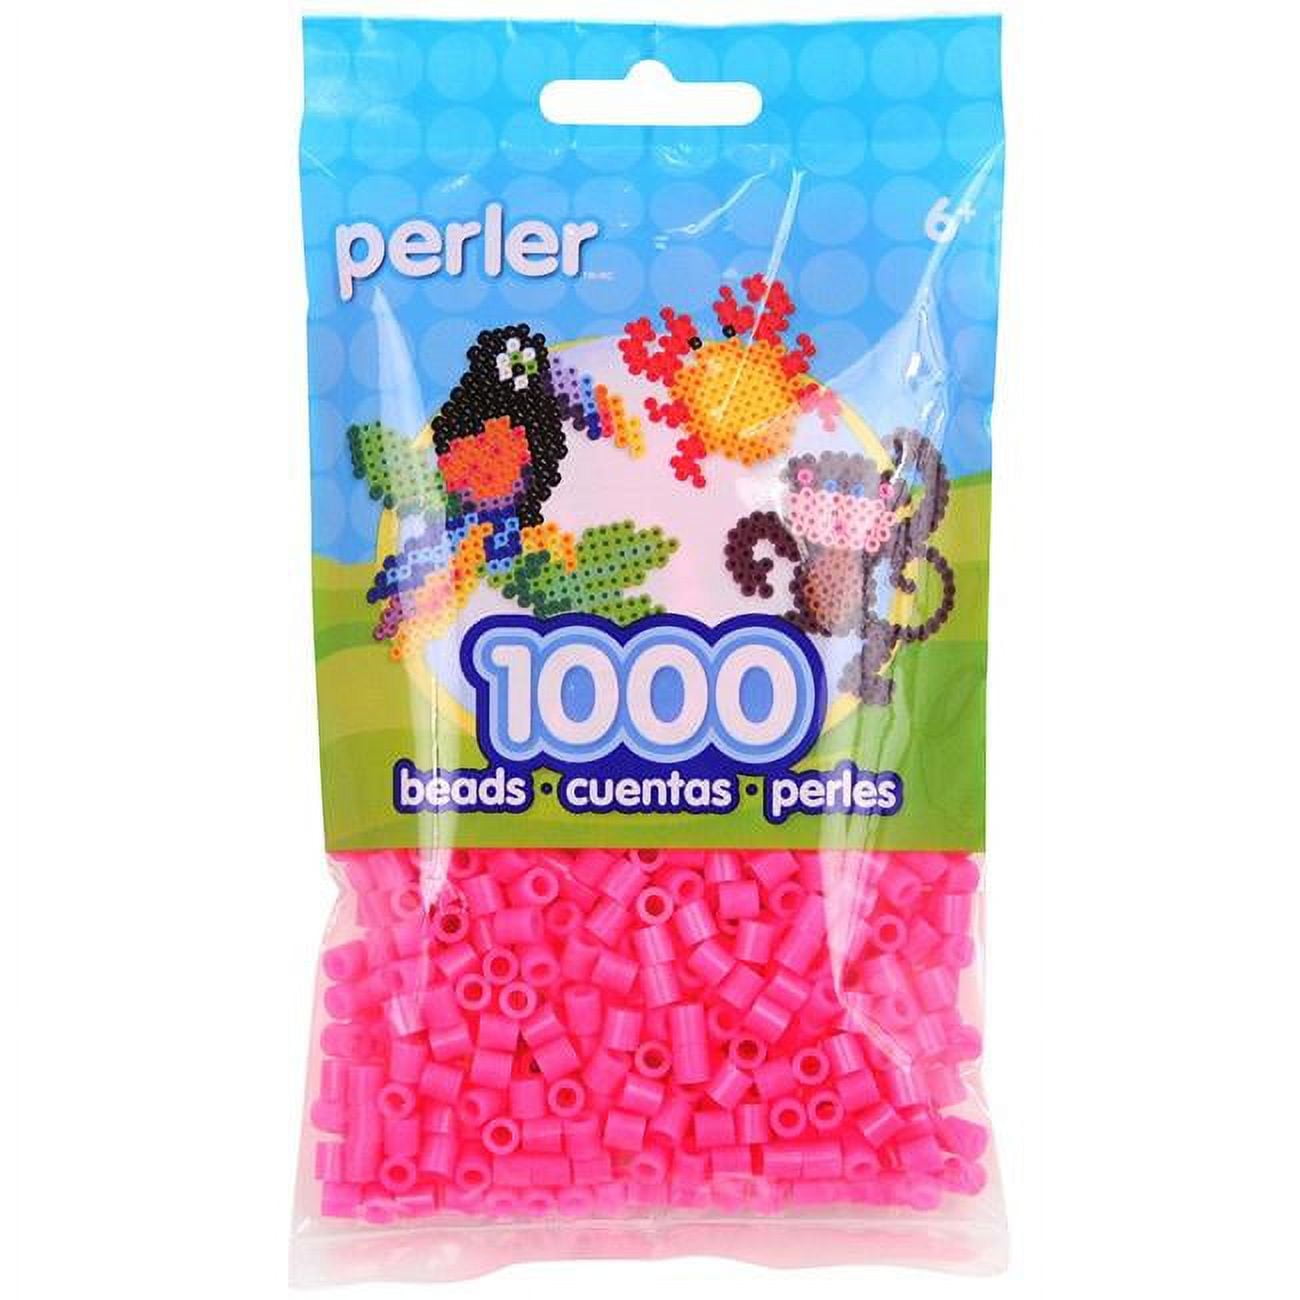 Perler Beads Fuse Beads for Crafts, 1000 pcs, Cranapple 